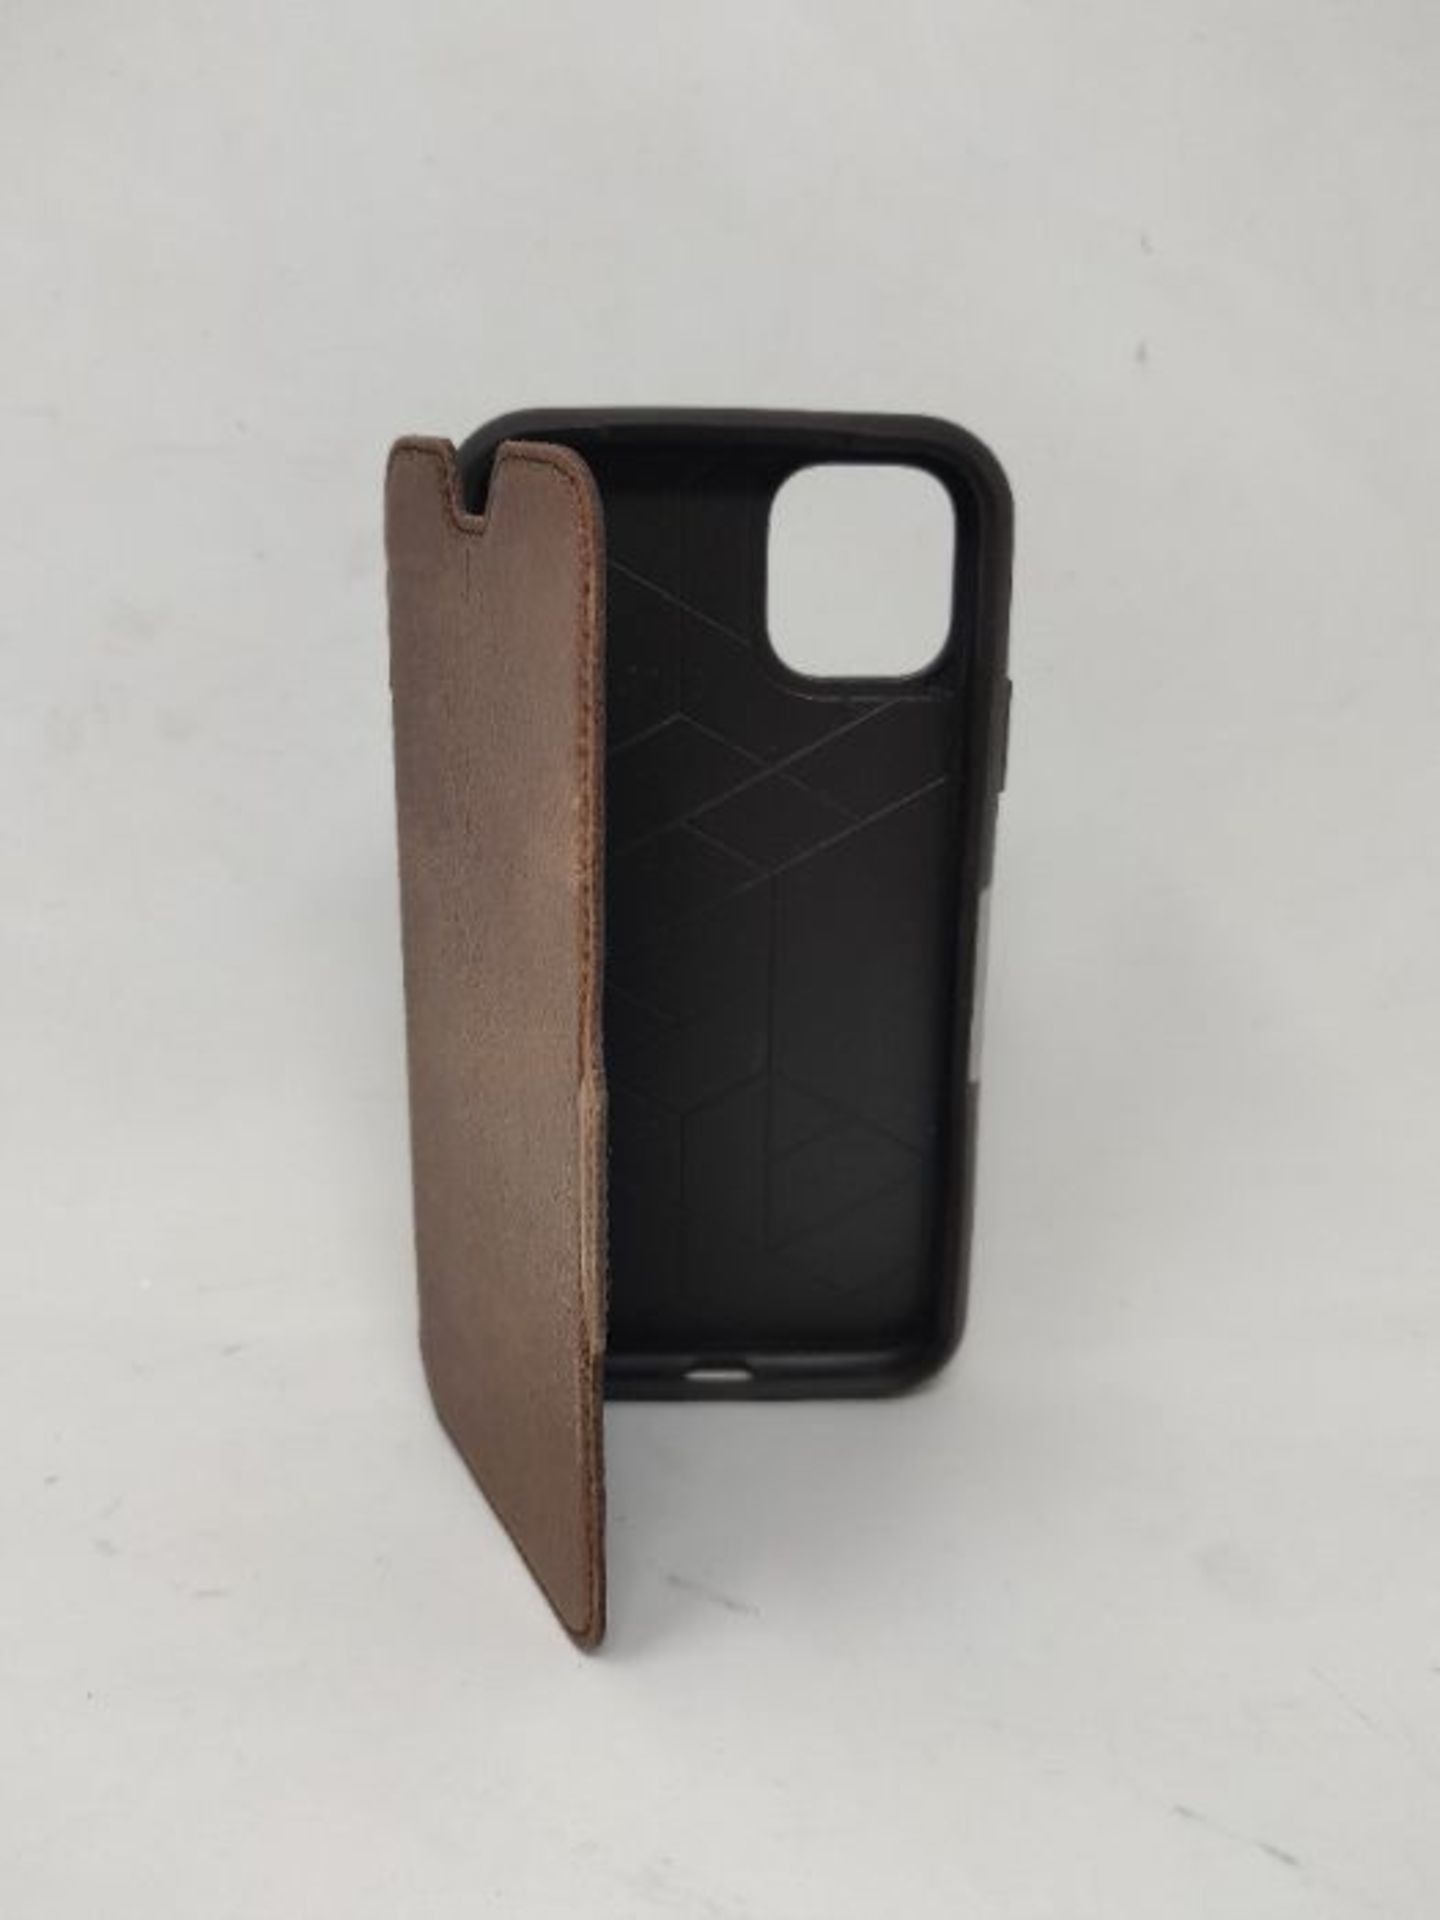 OtterBox for Apple iPhone 11, Premium Leather Protective Folio Case, Strada Series, Br - Image 2 of 2